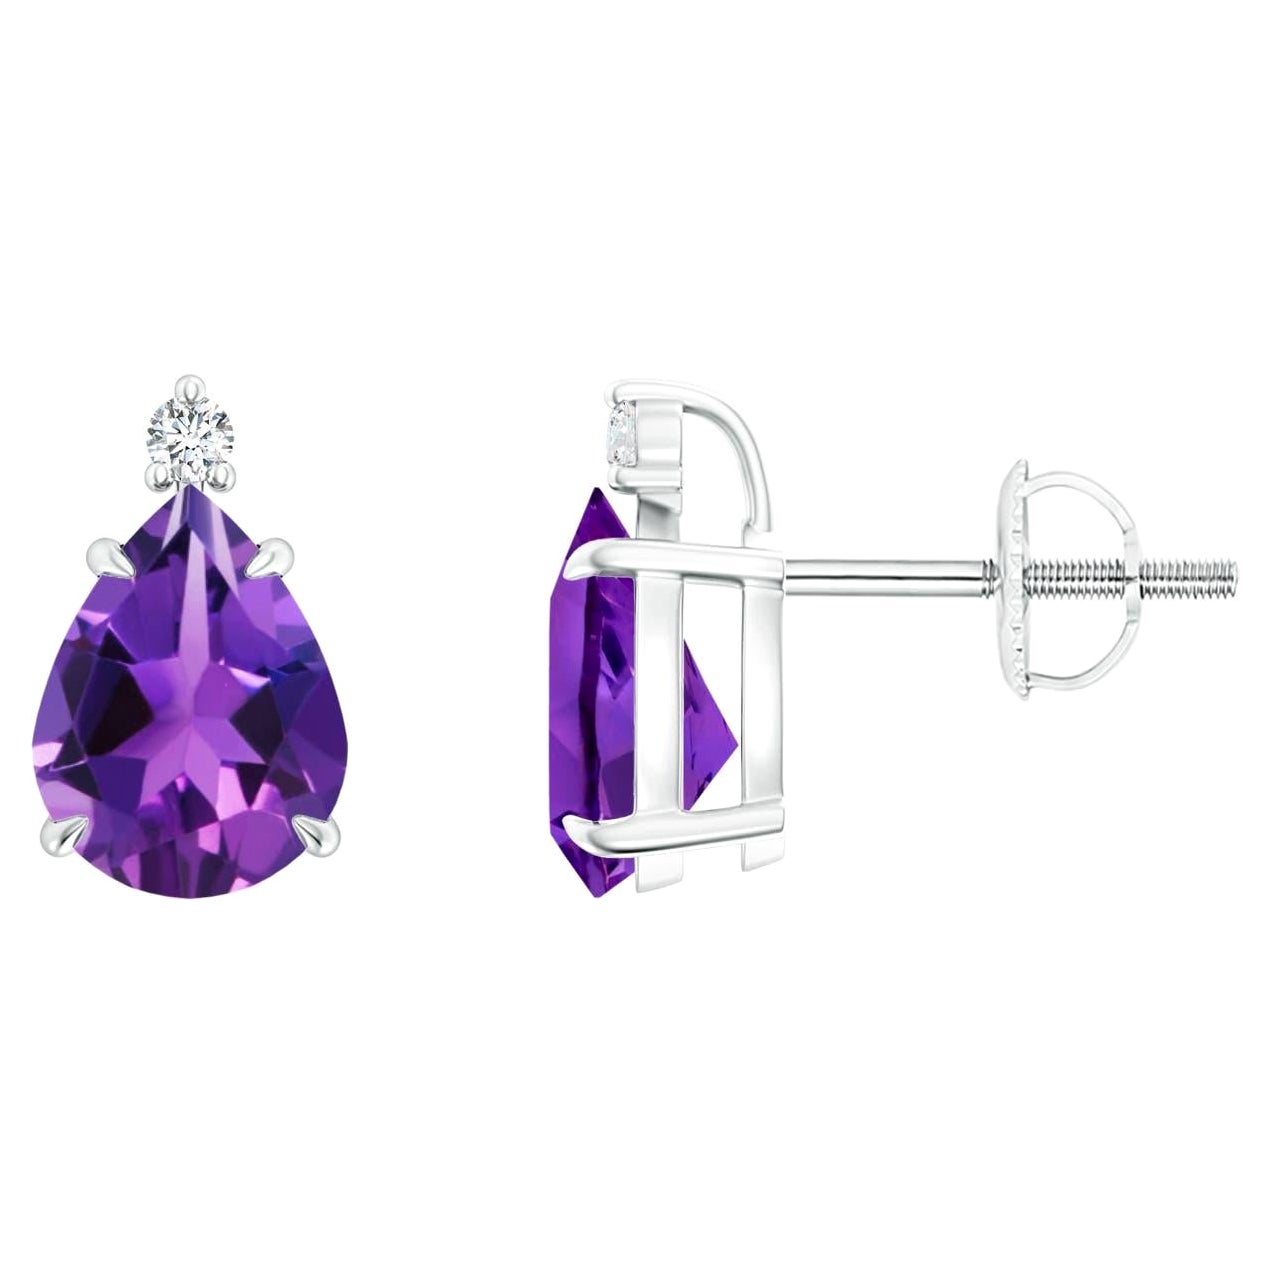 Natural Claw-Set Pear 2ct Amethyst Solitaire Earrings in 14K White Gold For Sale